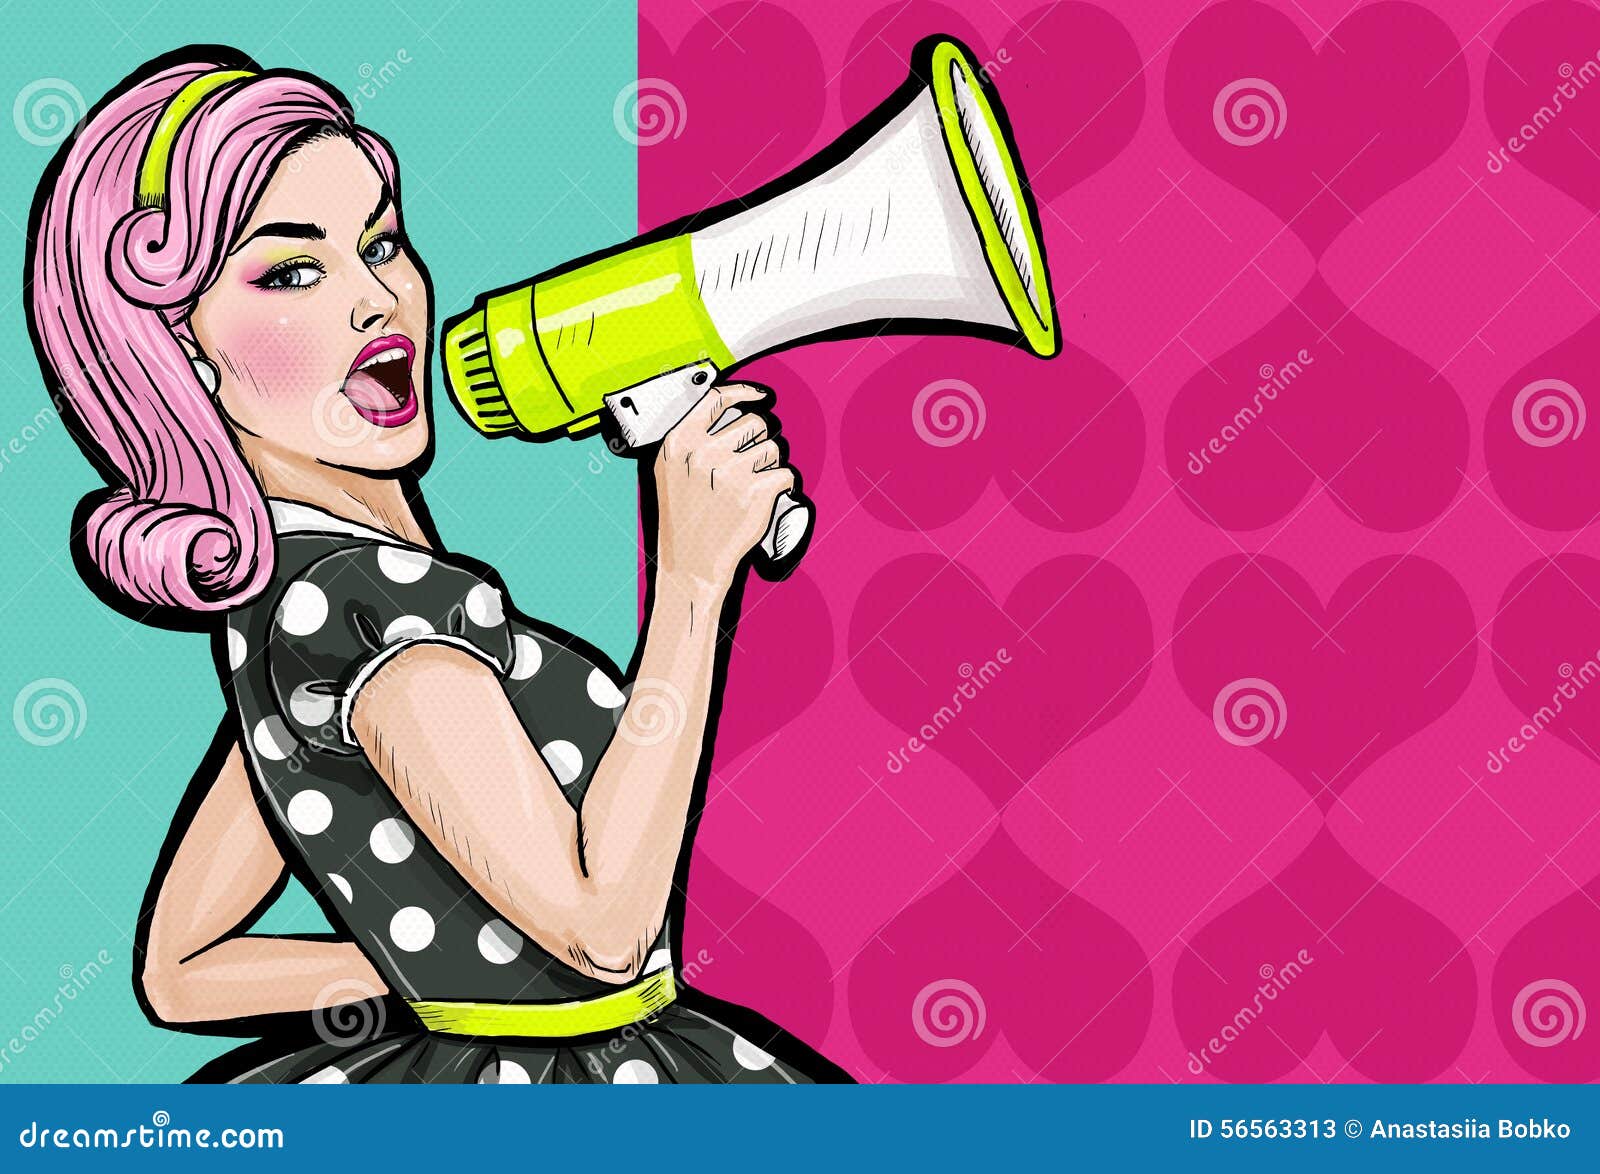 pop art girl with megaphone. woman with loudspeaker. girl announcing discount or sale. shopping time.